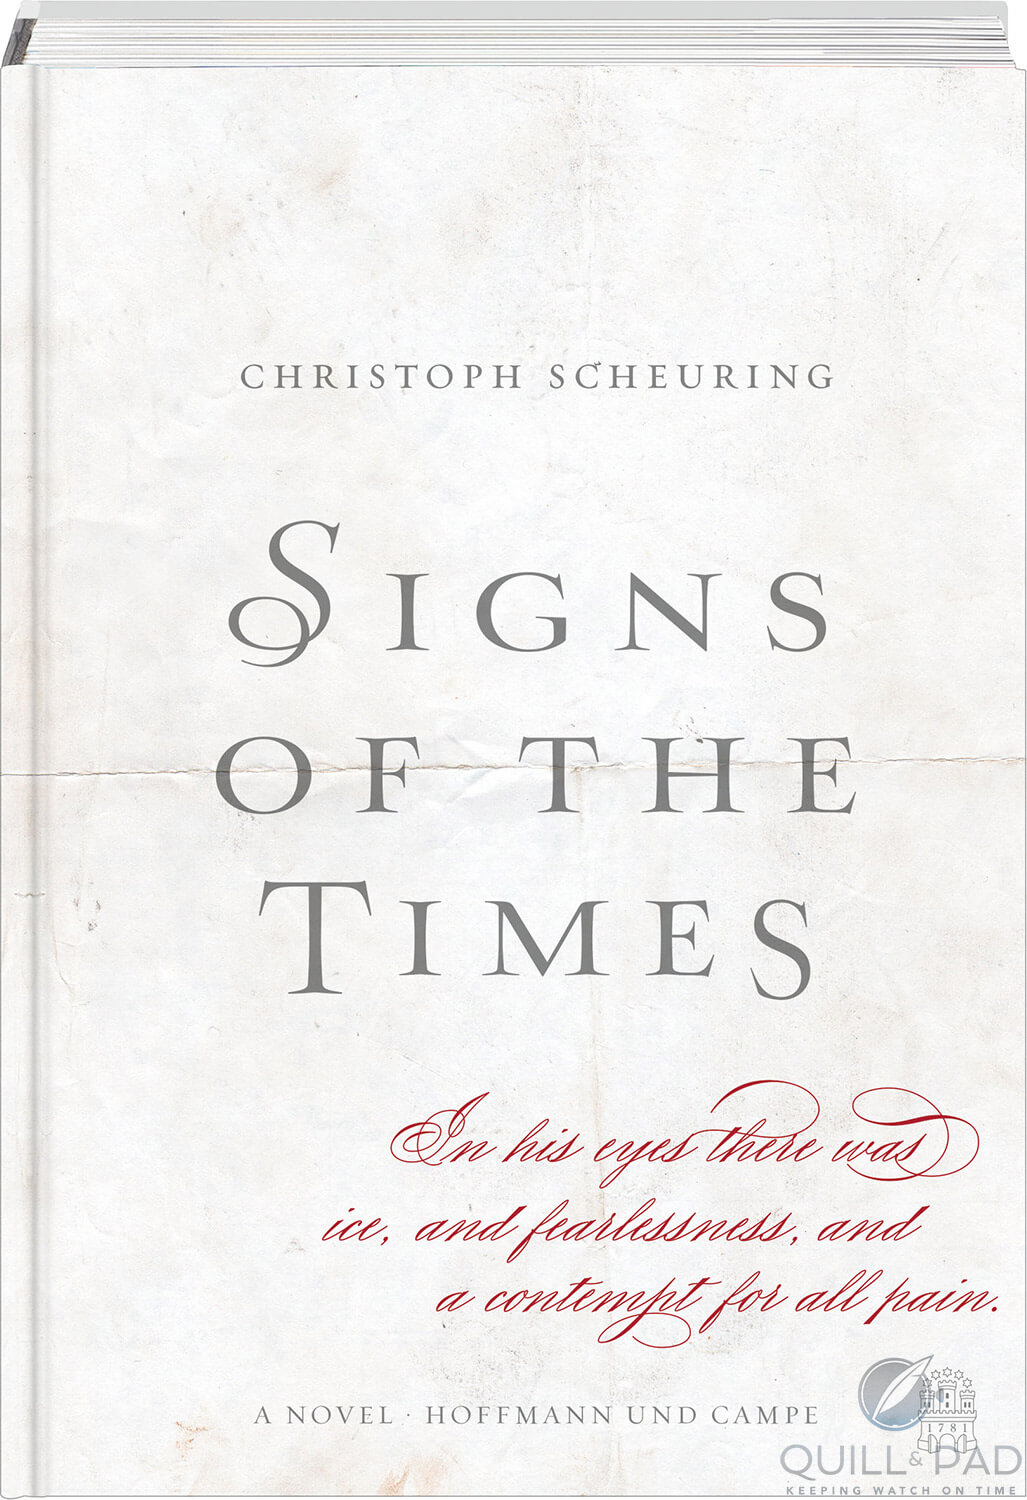 Cover of the historical fiction novel 'Signs of the Times' by Christoph Scheuring